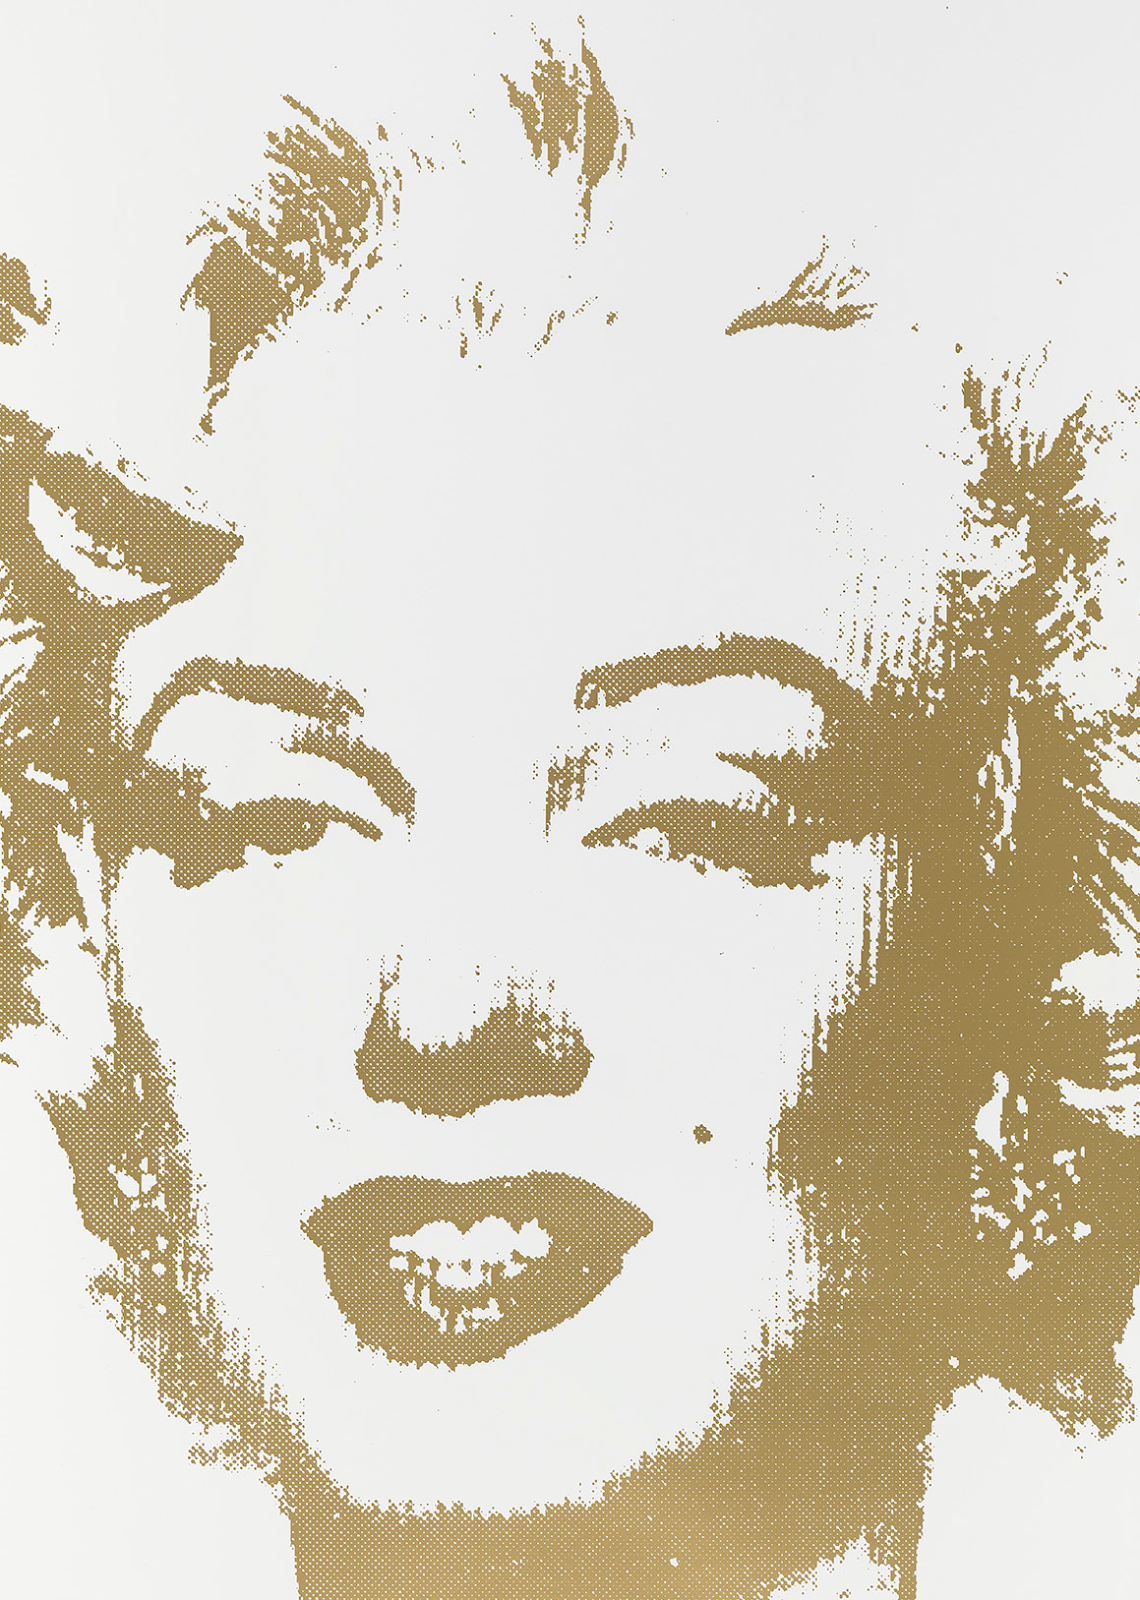 Catalog cover showing a Warhol head of Marilyn Monroe